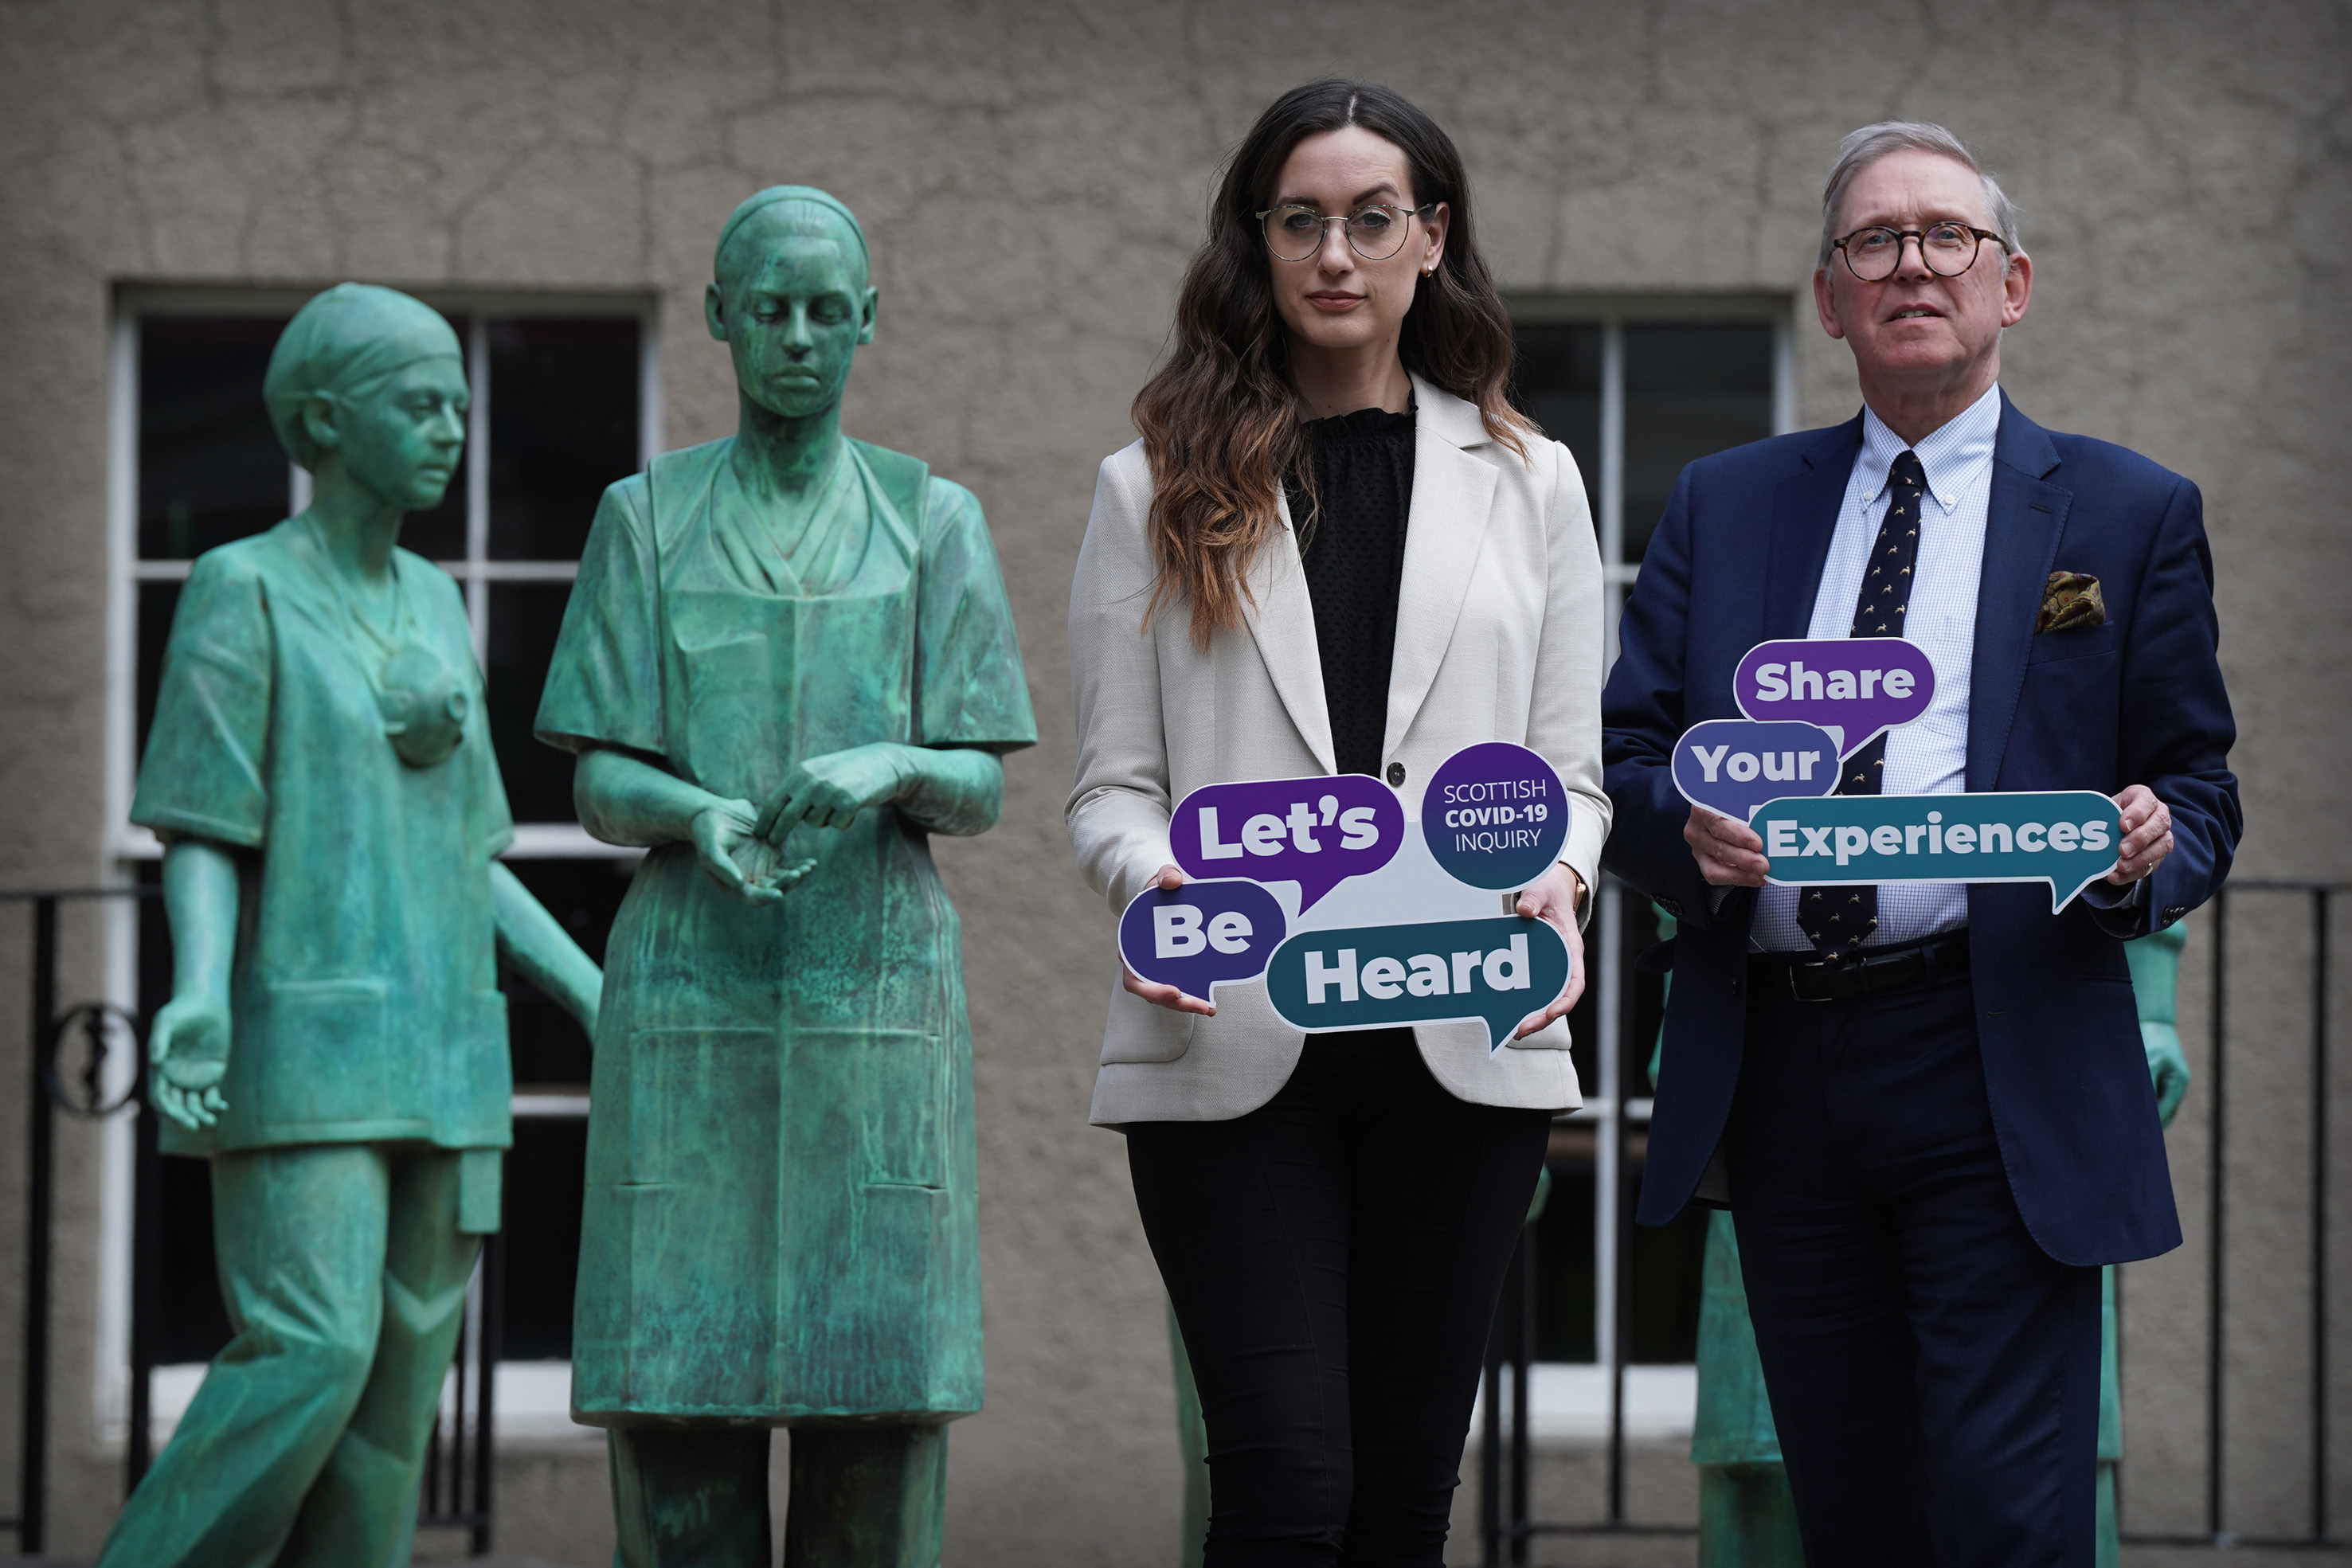 Lord Brailsford, Chair of the Scottish COVID-19 Inquiry, and Alexandra Anderson, Head of Let’s Be Heard, at the Royal College of Surgeons of Edinburgh